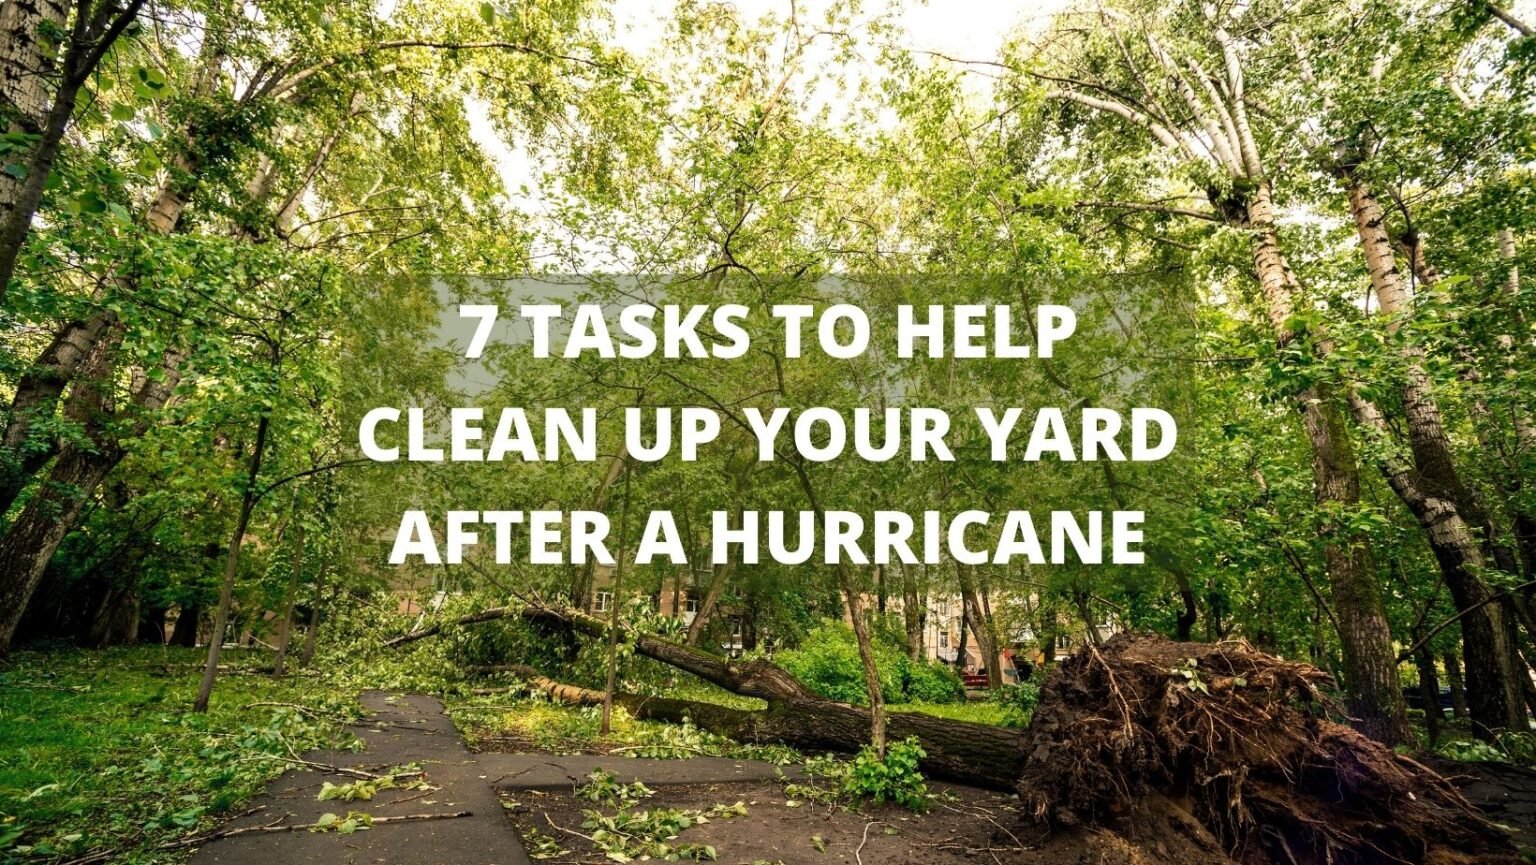 7 Tasks to help clean up your yard after a hurricane